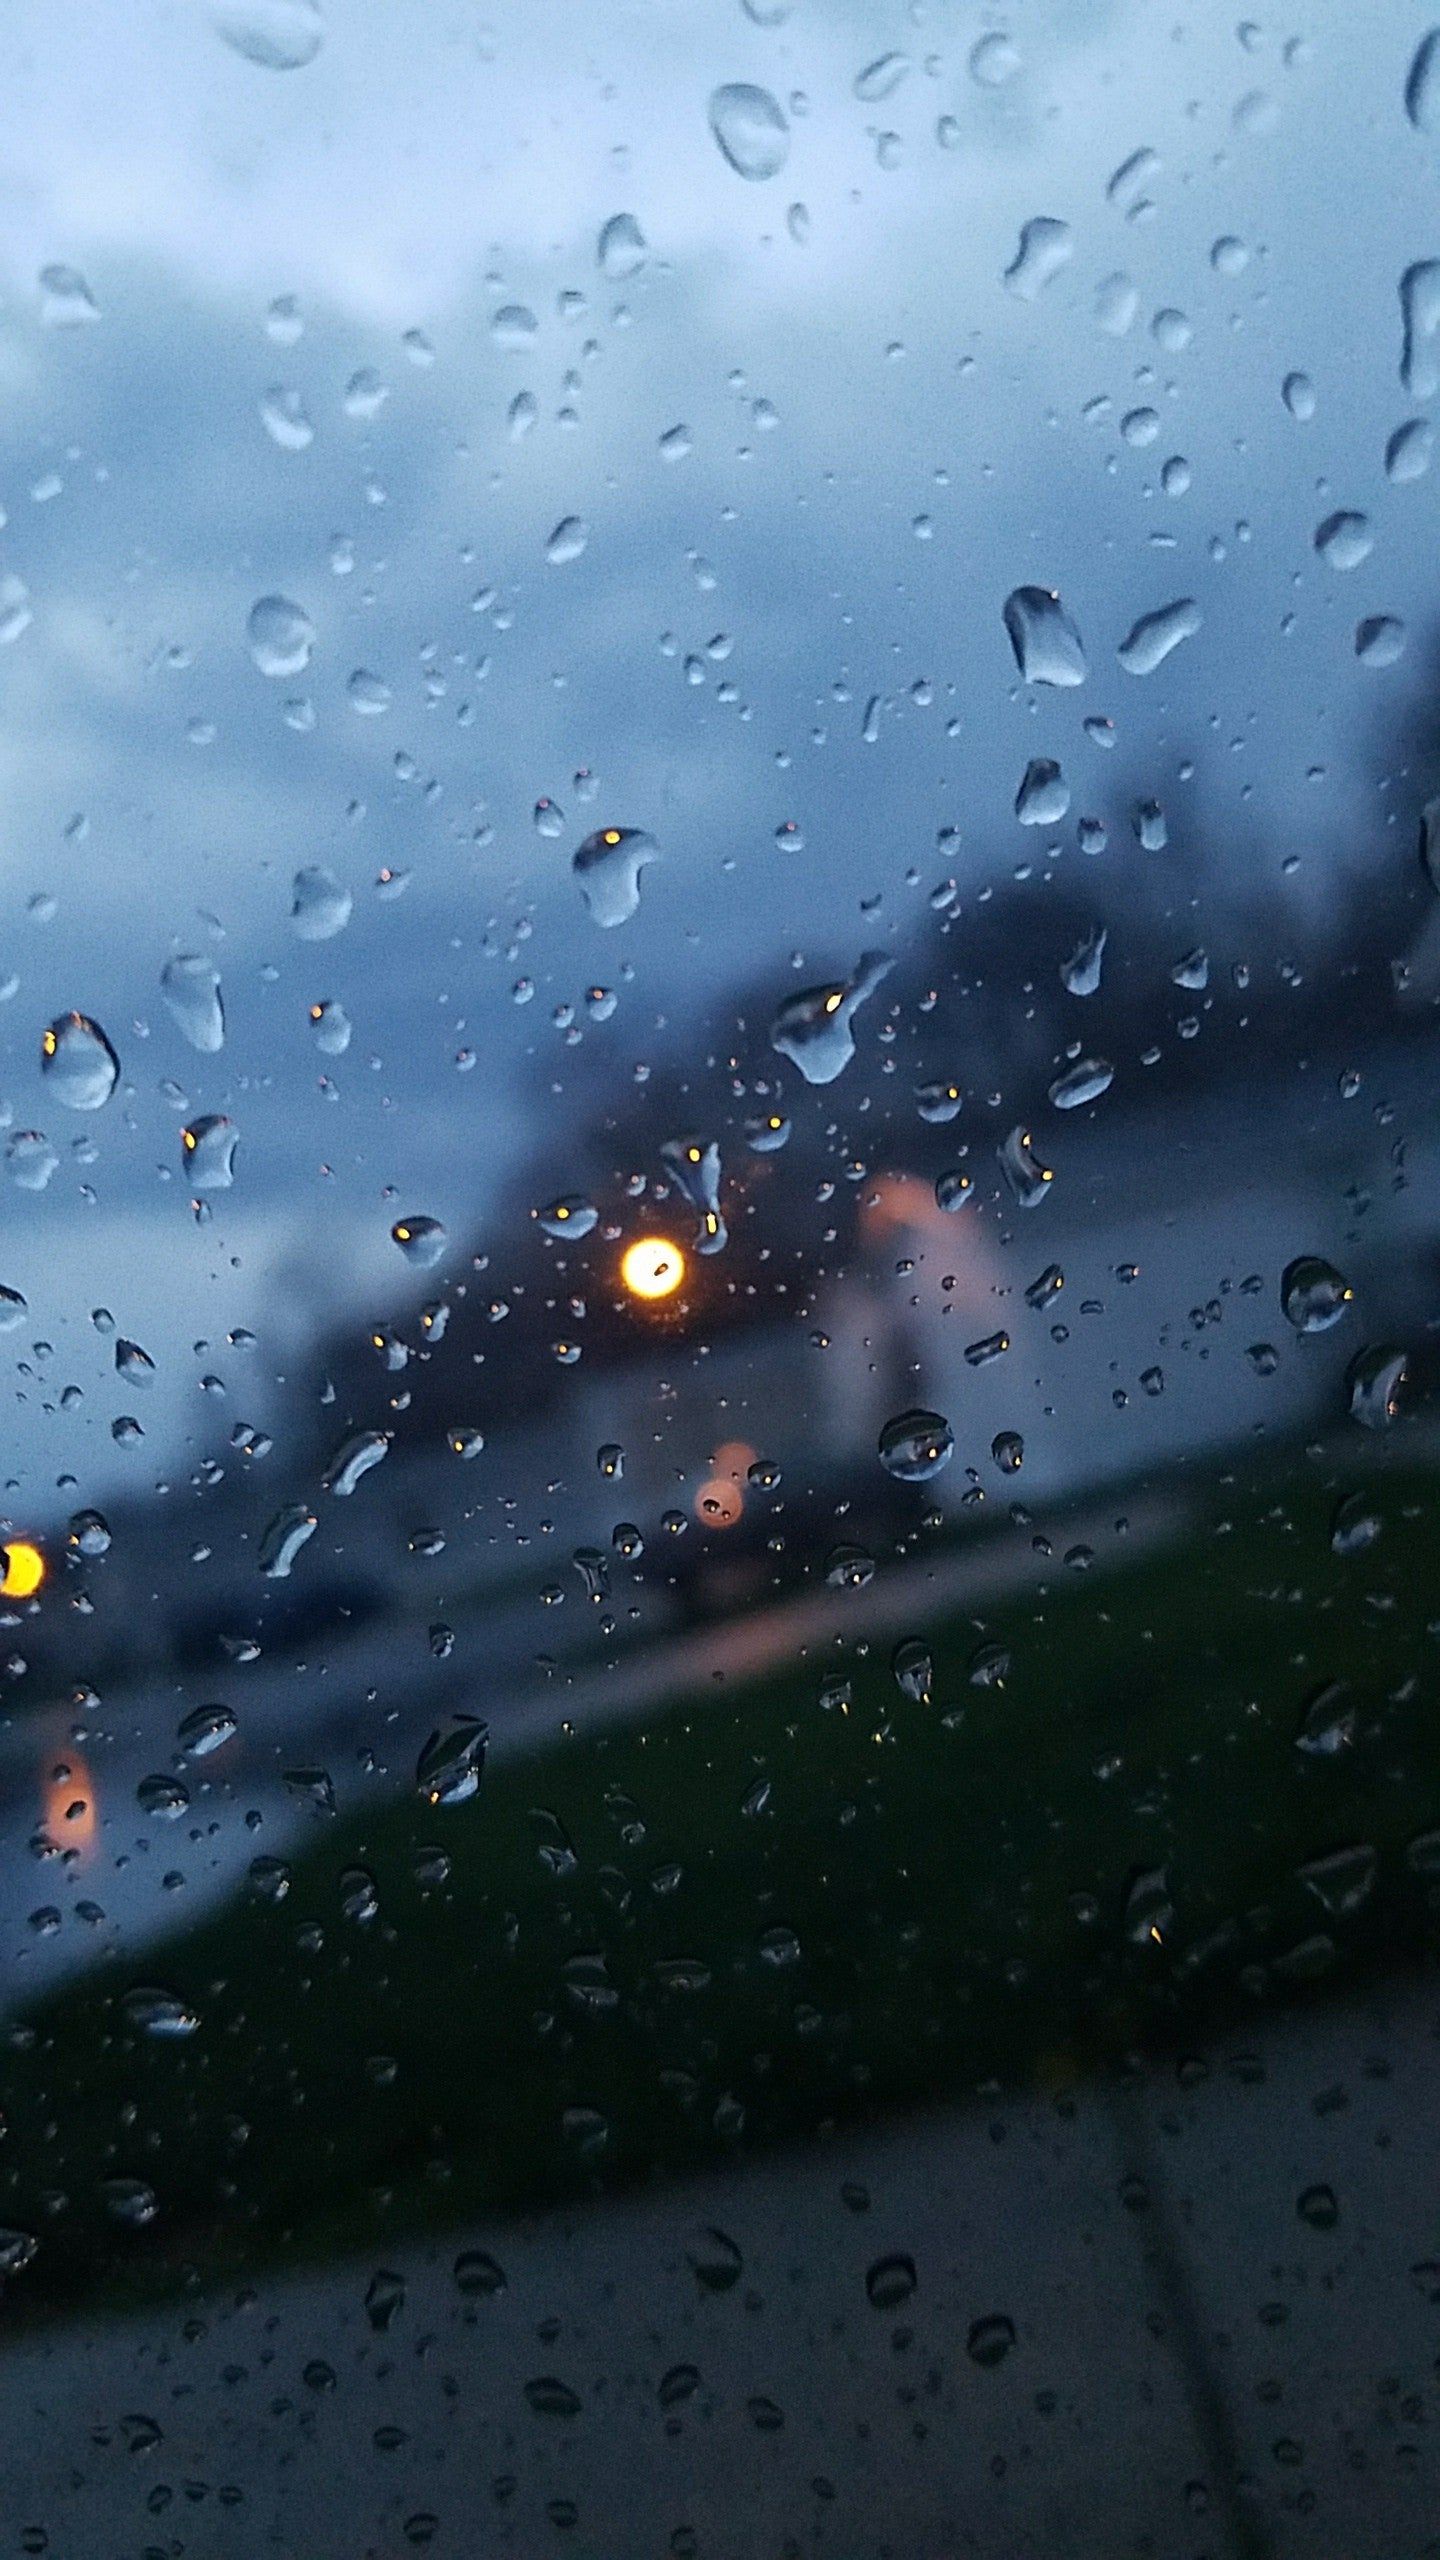 A shot I took through my driver's window on a rainy day. iPhone X Wallpaper X Wallpaper HD